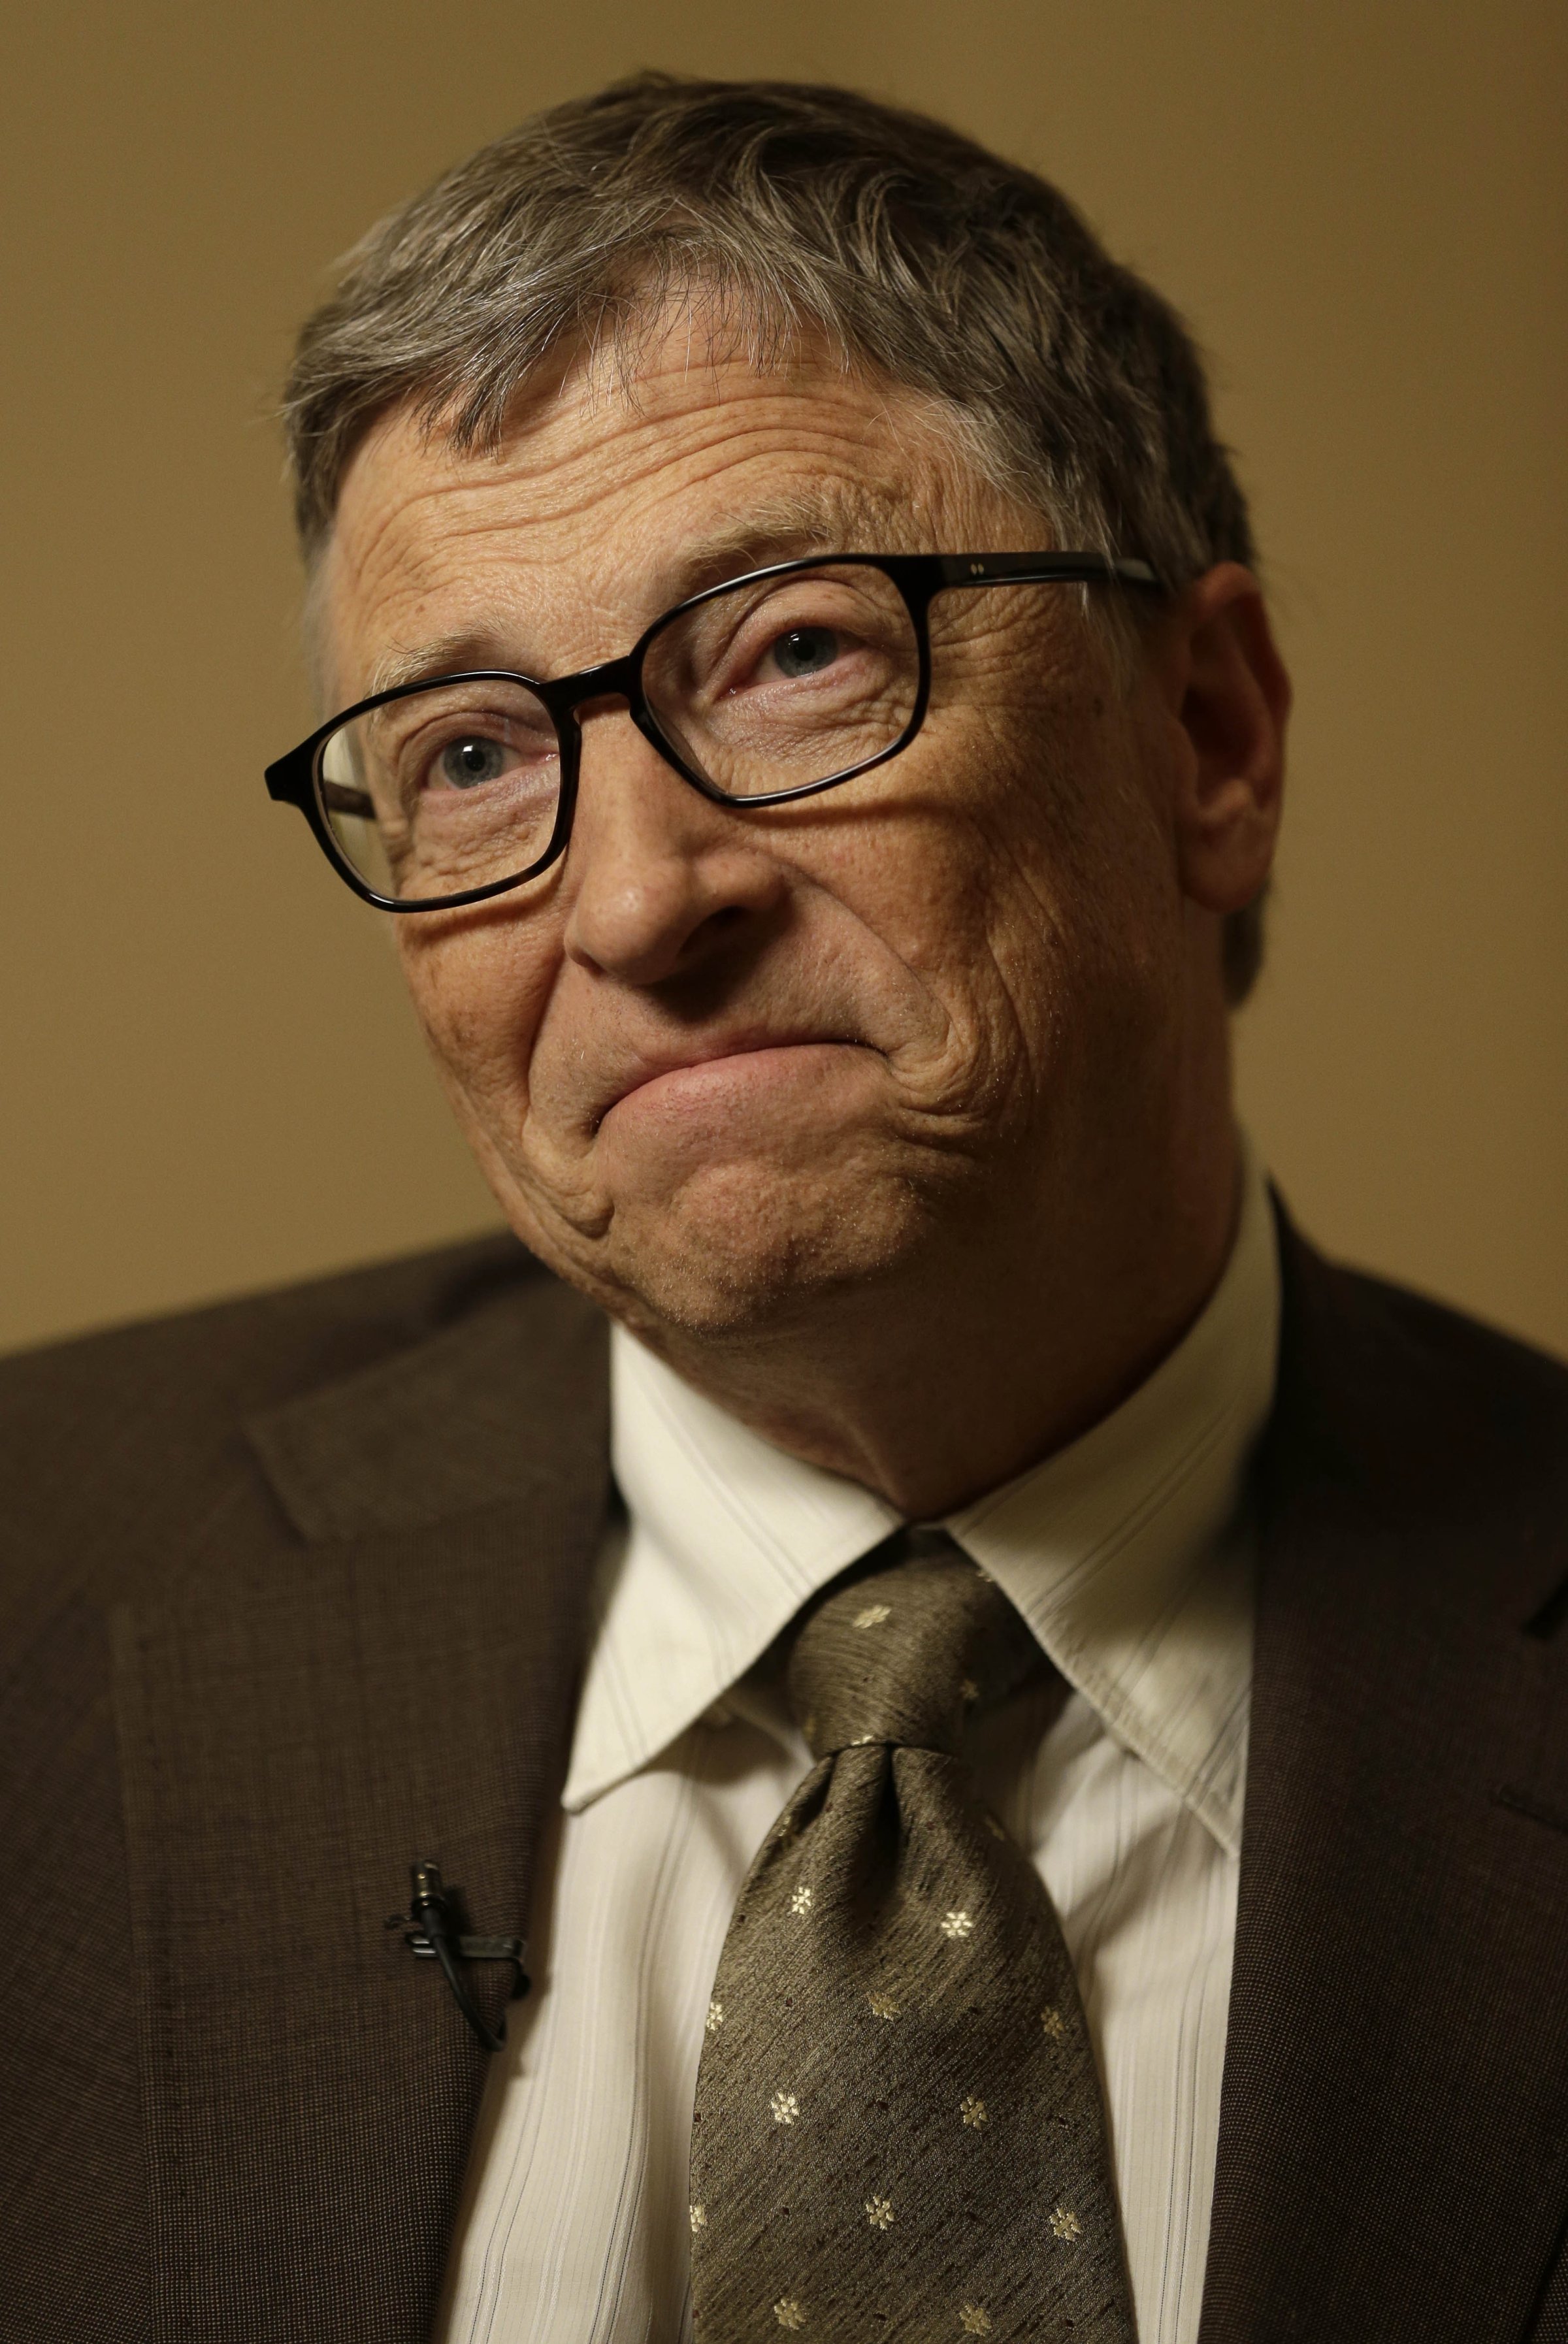 Bill Gates during an interview in New York City on Jan. 21, 2015.